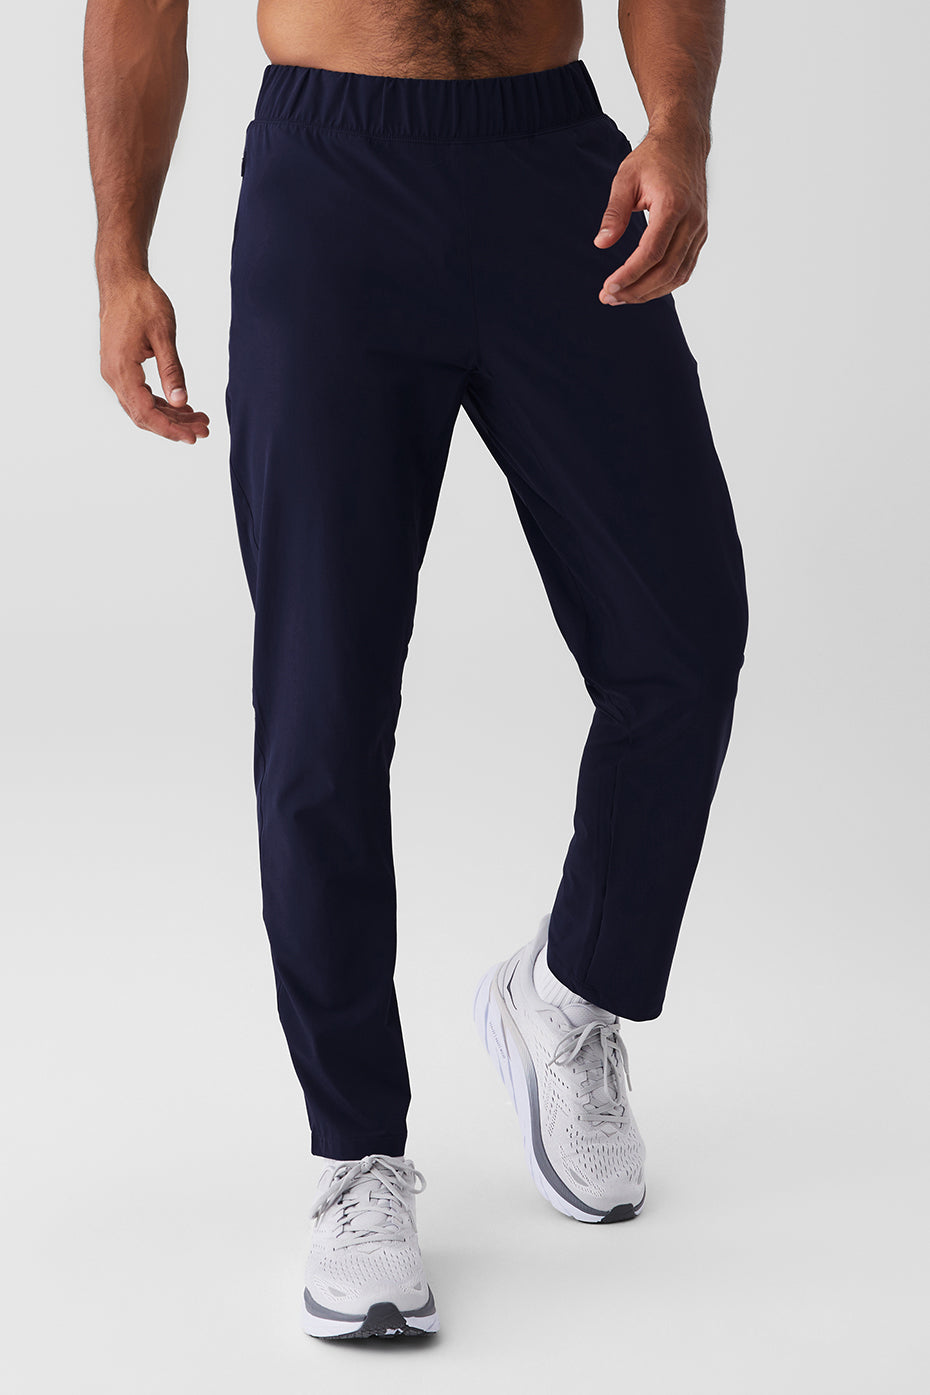 Alo Yoga Stability 2 In 1 Pant – The Shop at Equinox